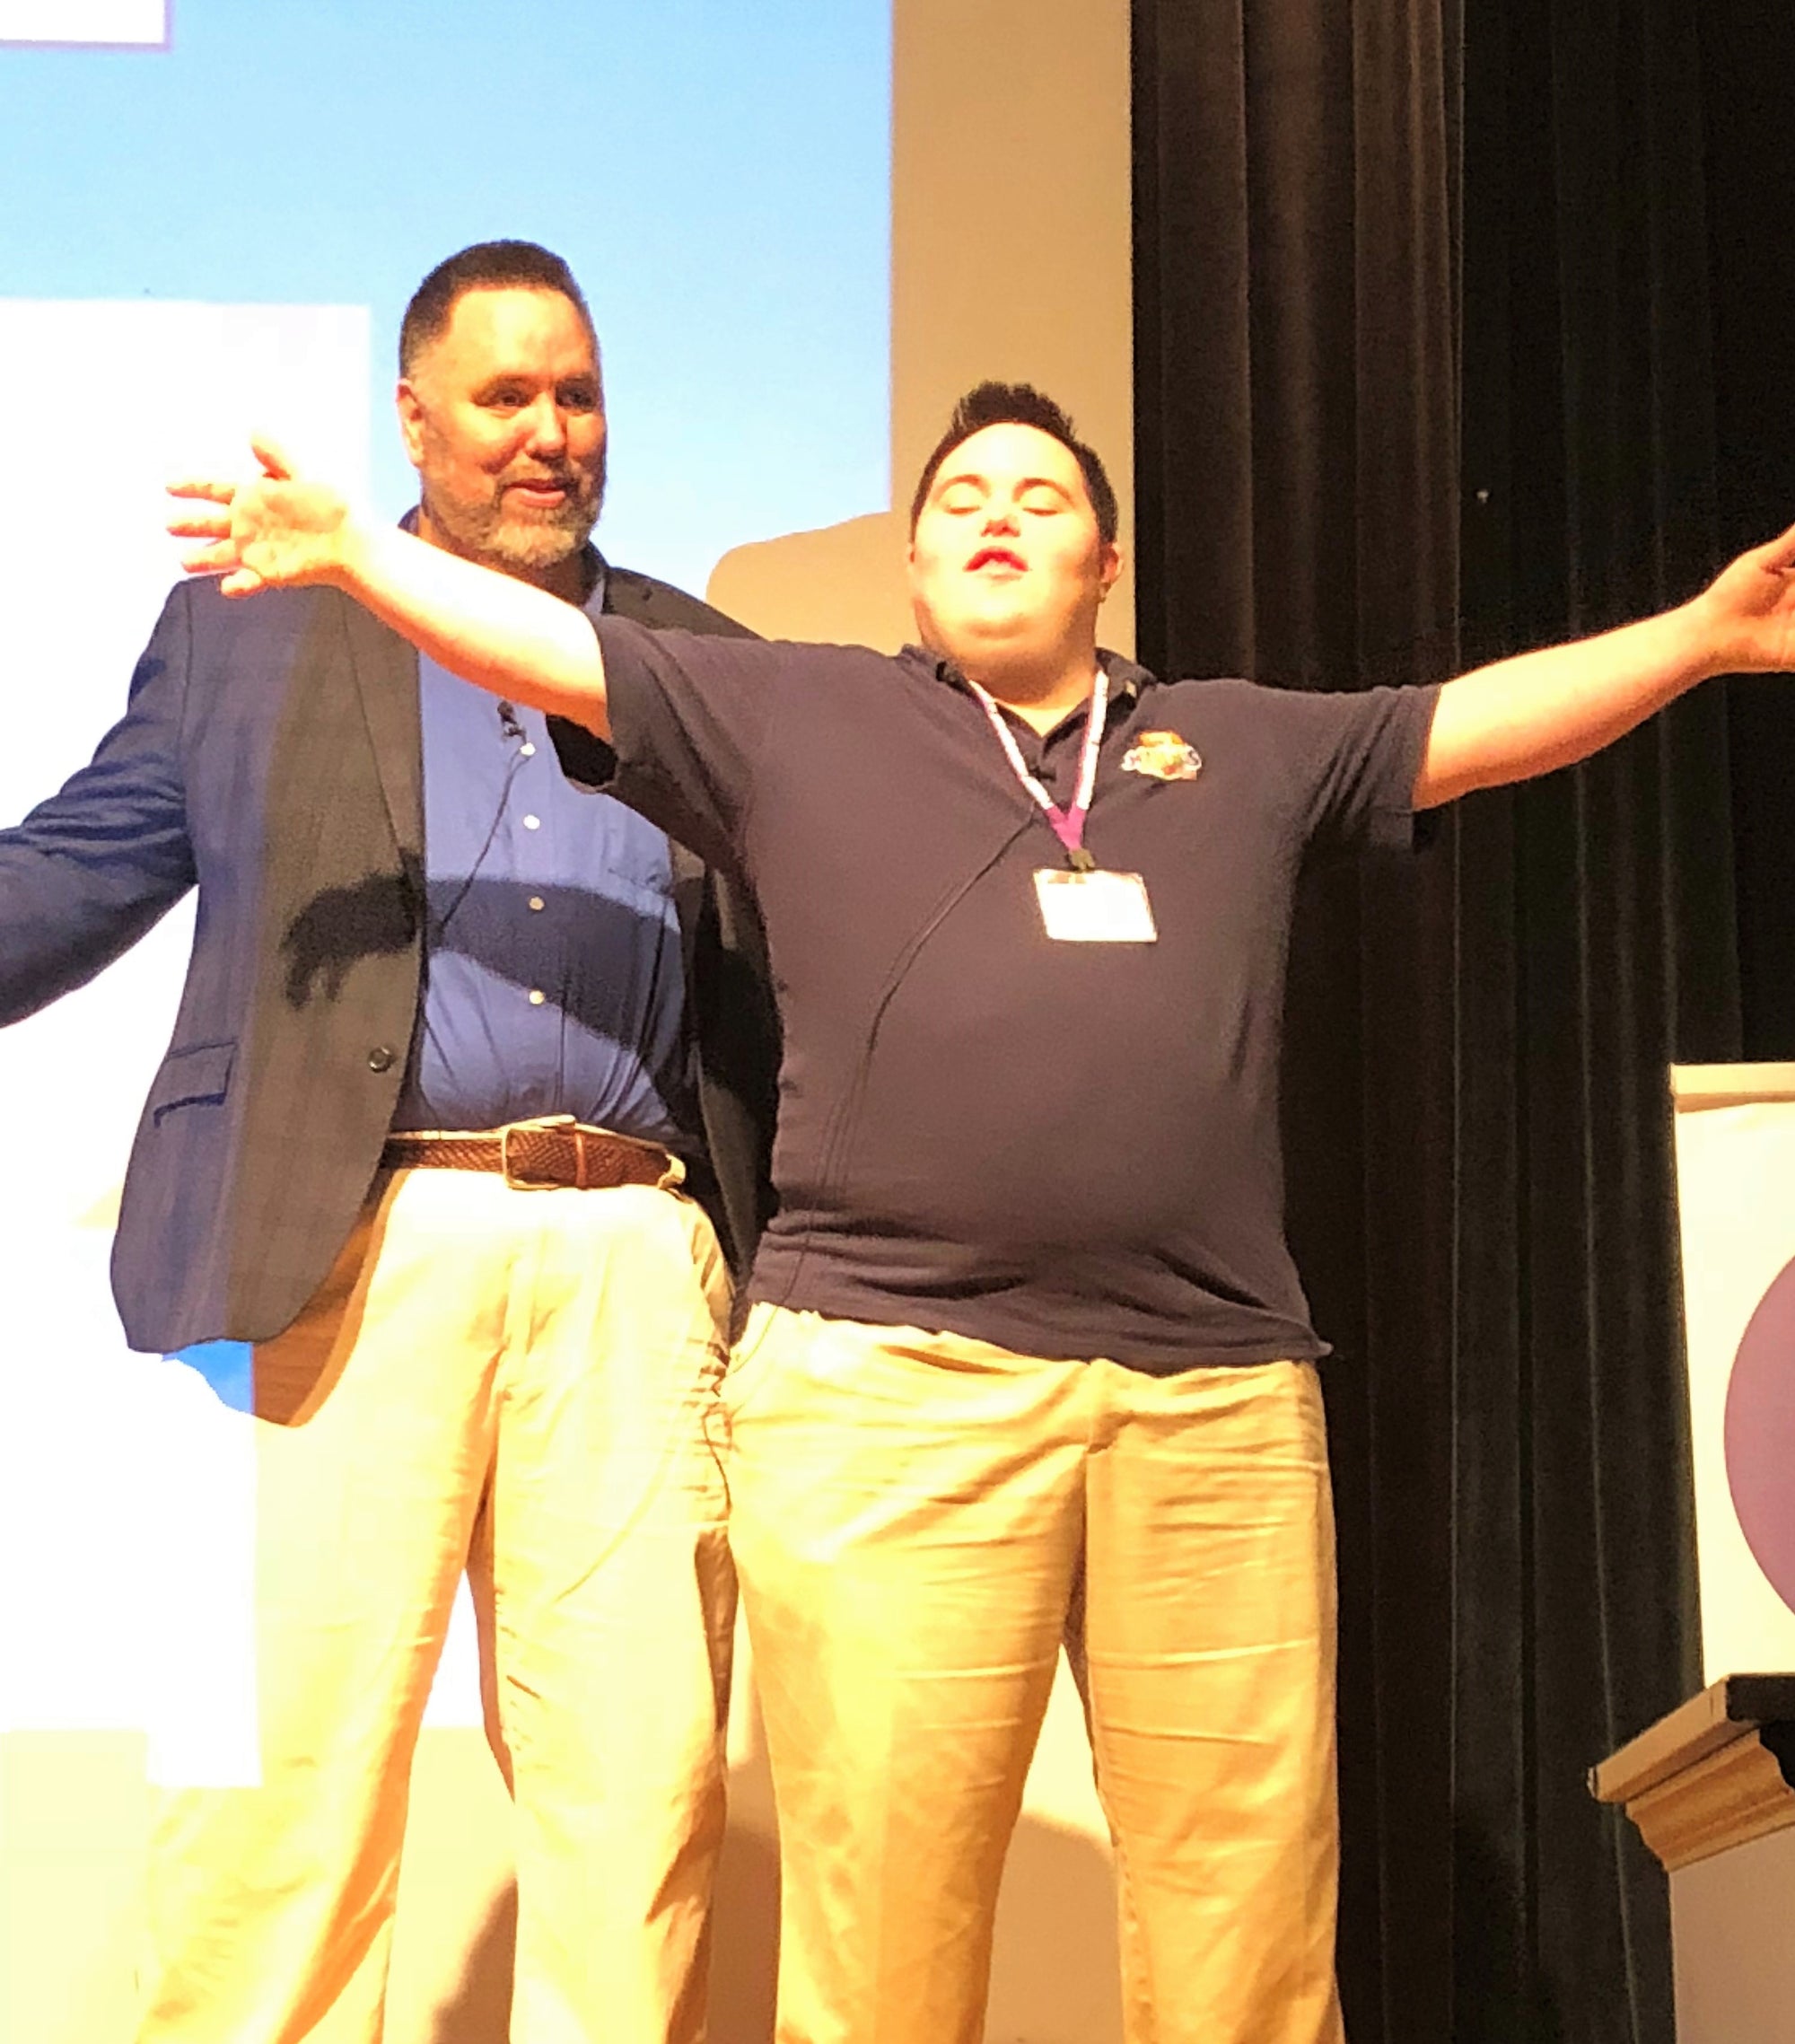 John and Mark X. Cronin Speak to Future Doctors at Holy Cross about Treating People with Intellectual Developmental Disabilities